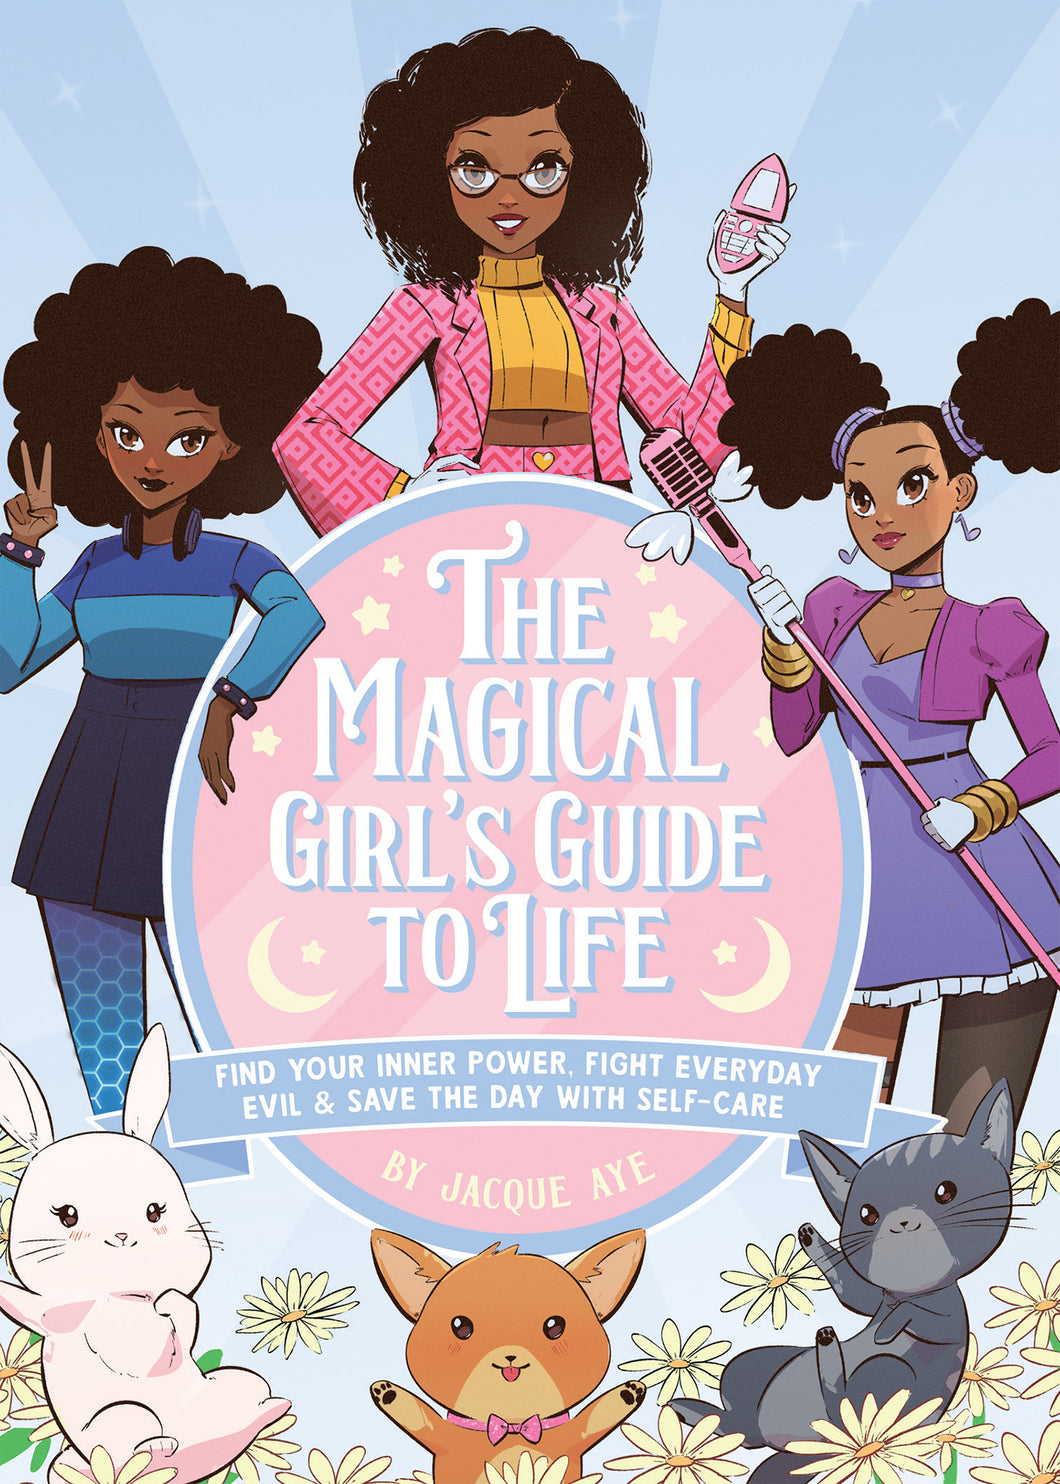 The Magical Girl’s Guide to Life